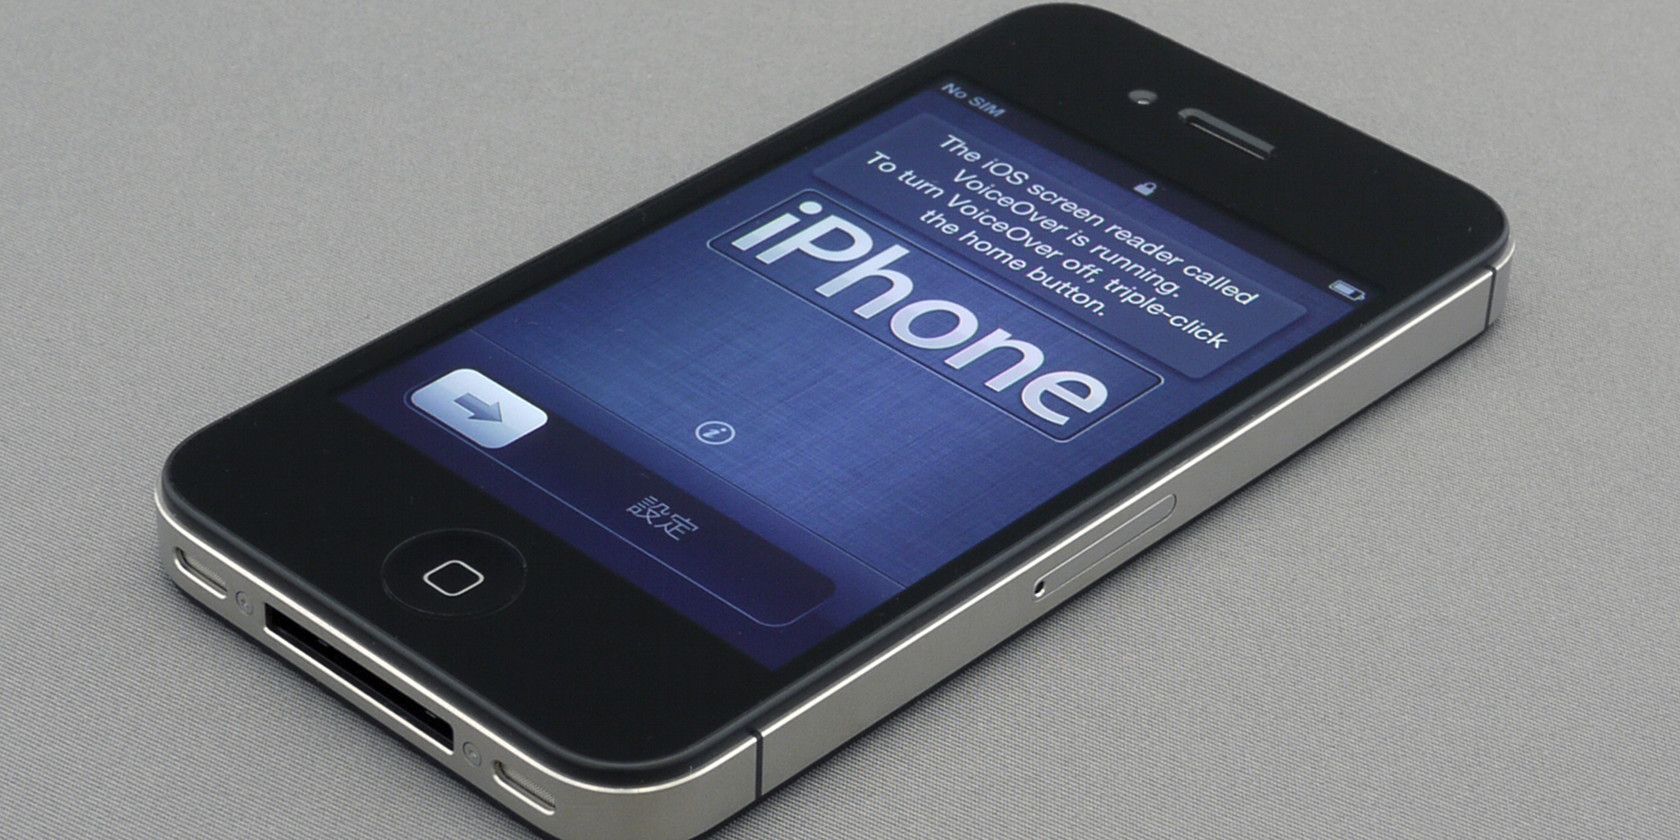 the iPhone 4S on its setup screen